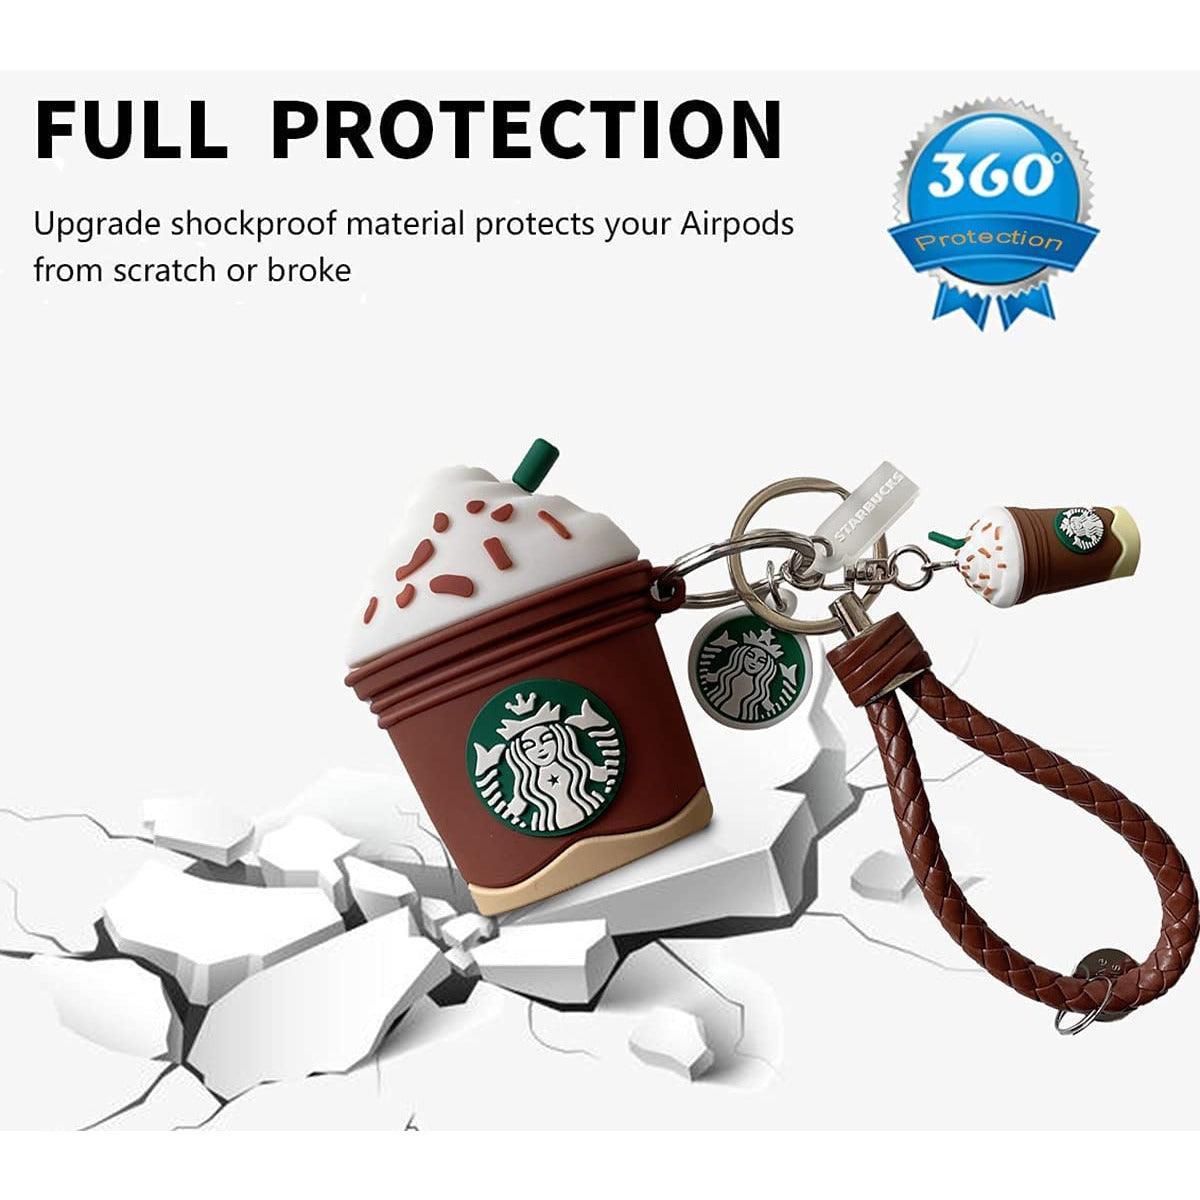 AirPod 1 & 2 Case Compatible Silicone Protective Cover Shockproof and Drop Resistant 3D Cute Starbucks - Ice Cream Brown - BumbleToys - 18+, 6+ Years, Boys, Funko, Girls, Key Chain, Pre-Order